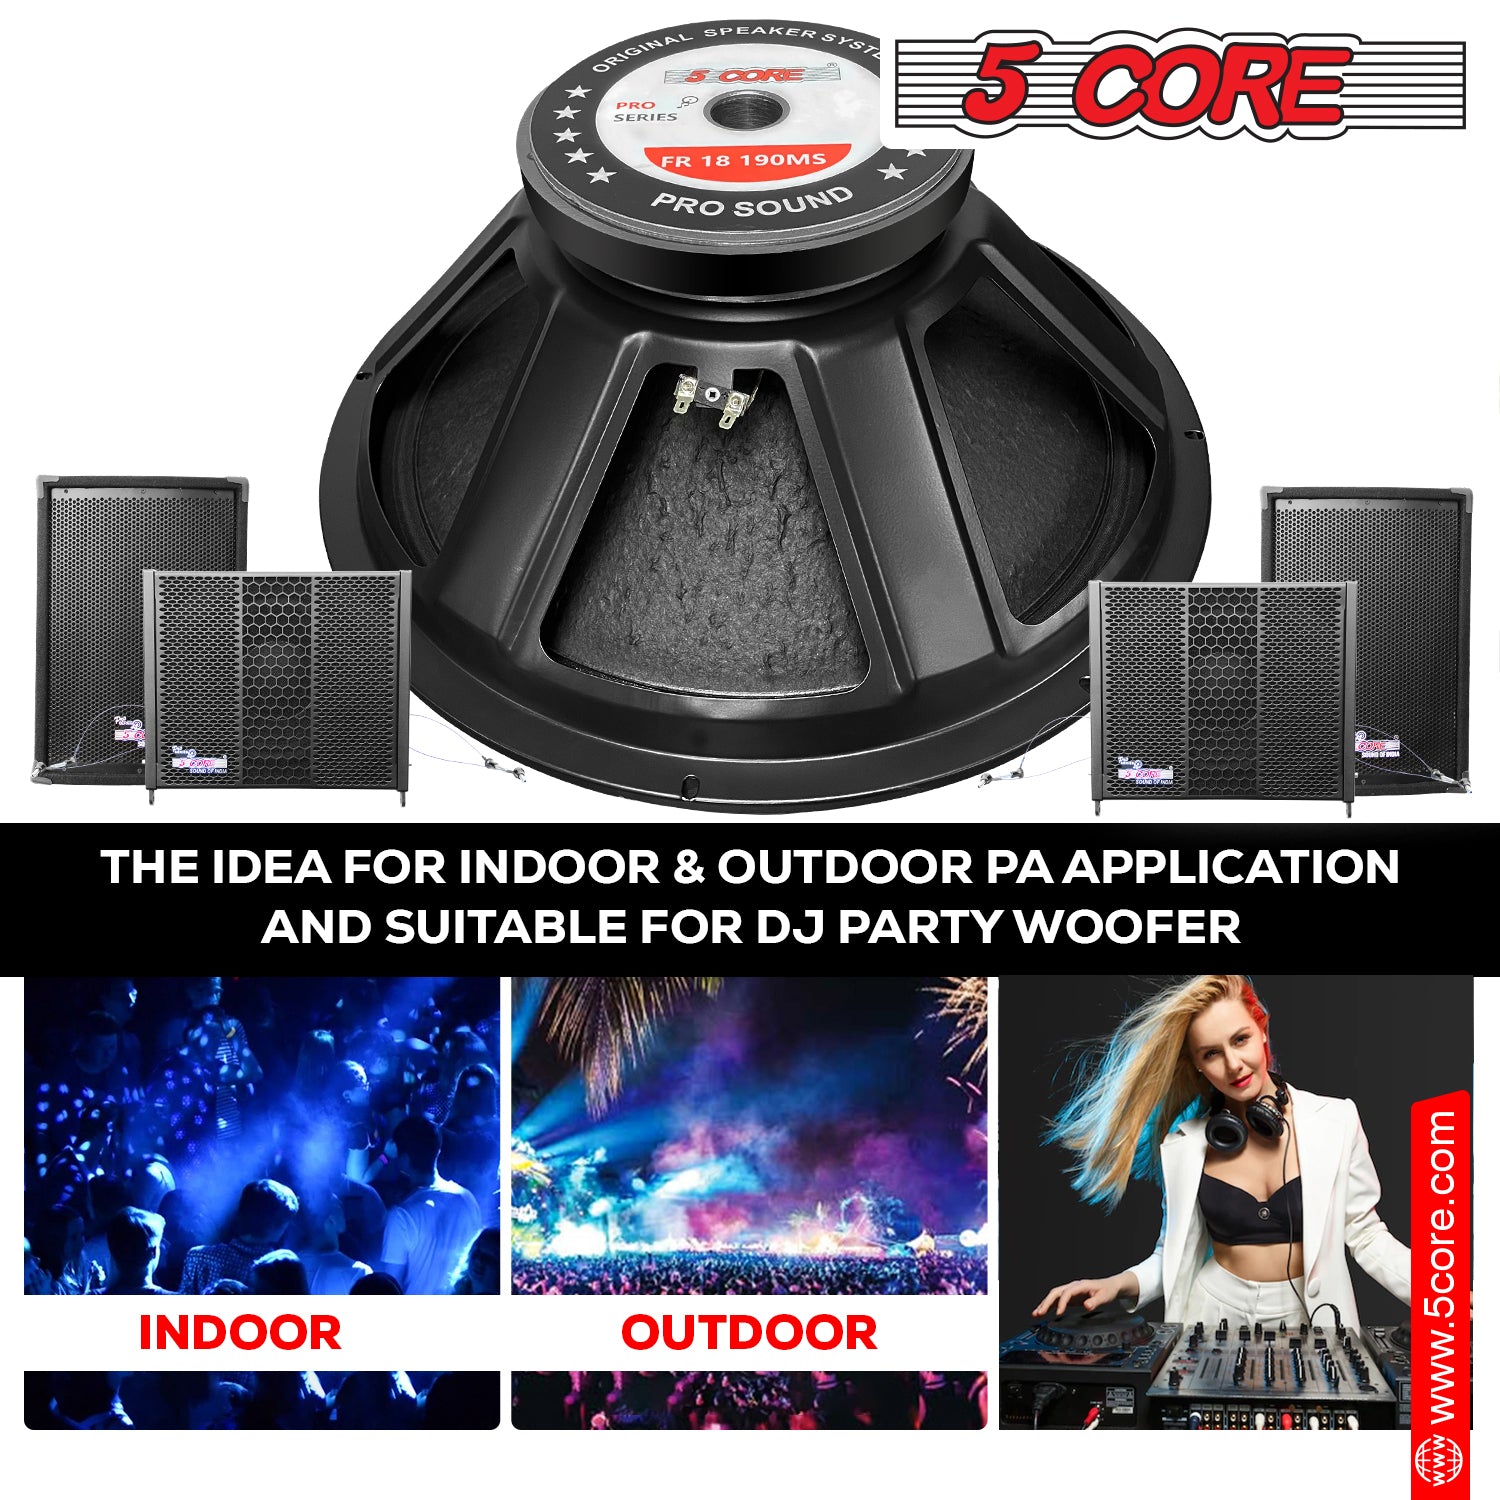 This 18 inch subwoofer ideal for indoor & Outdoor PA application and suitable for dj party woofer.